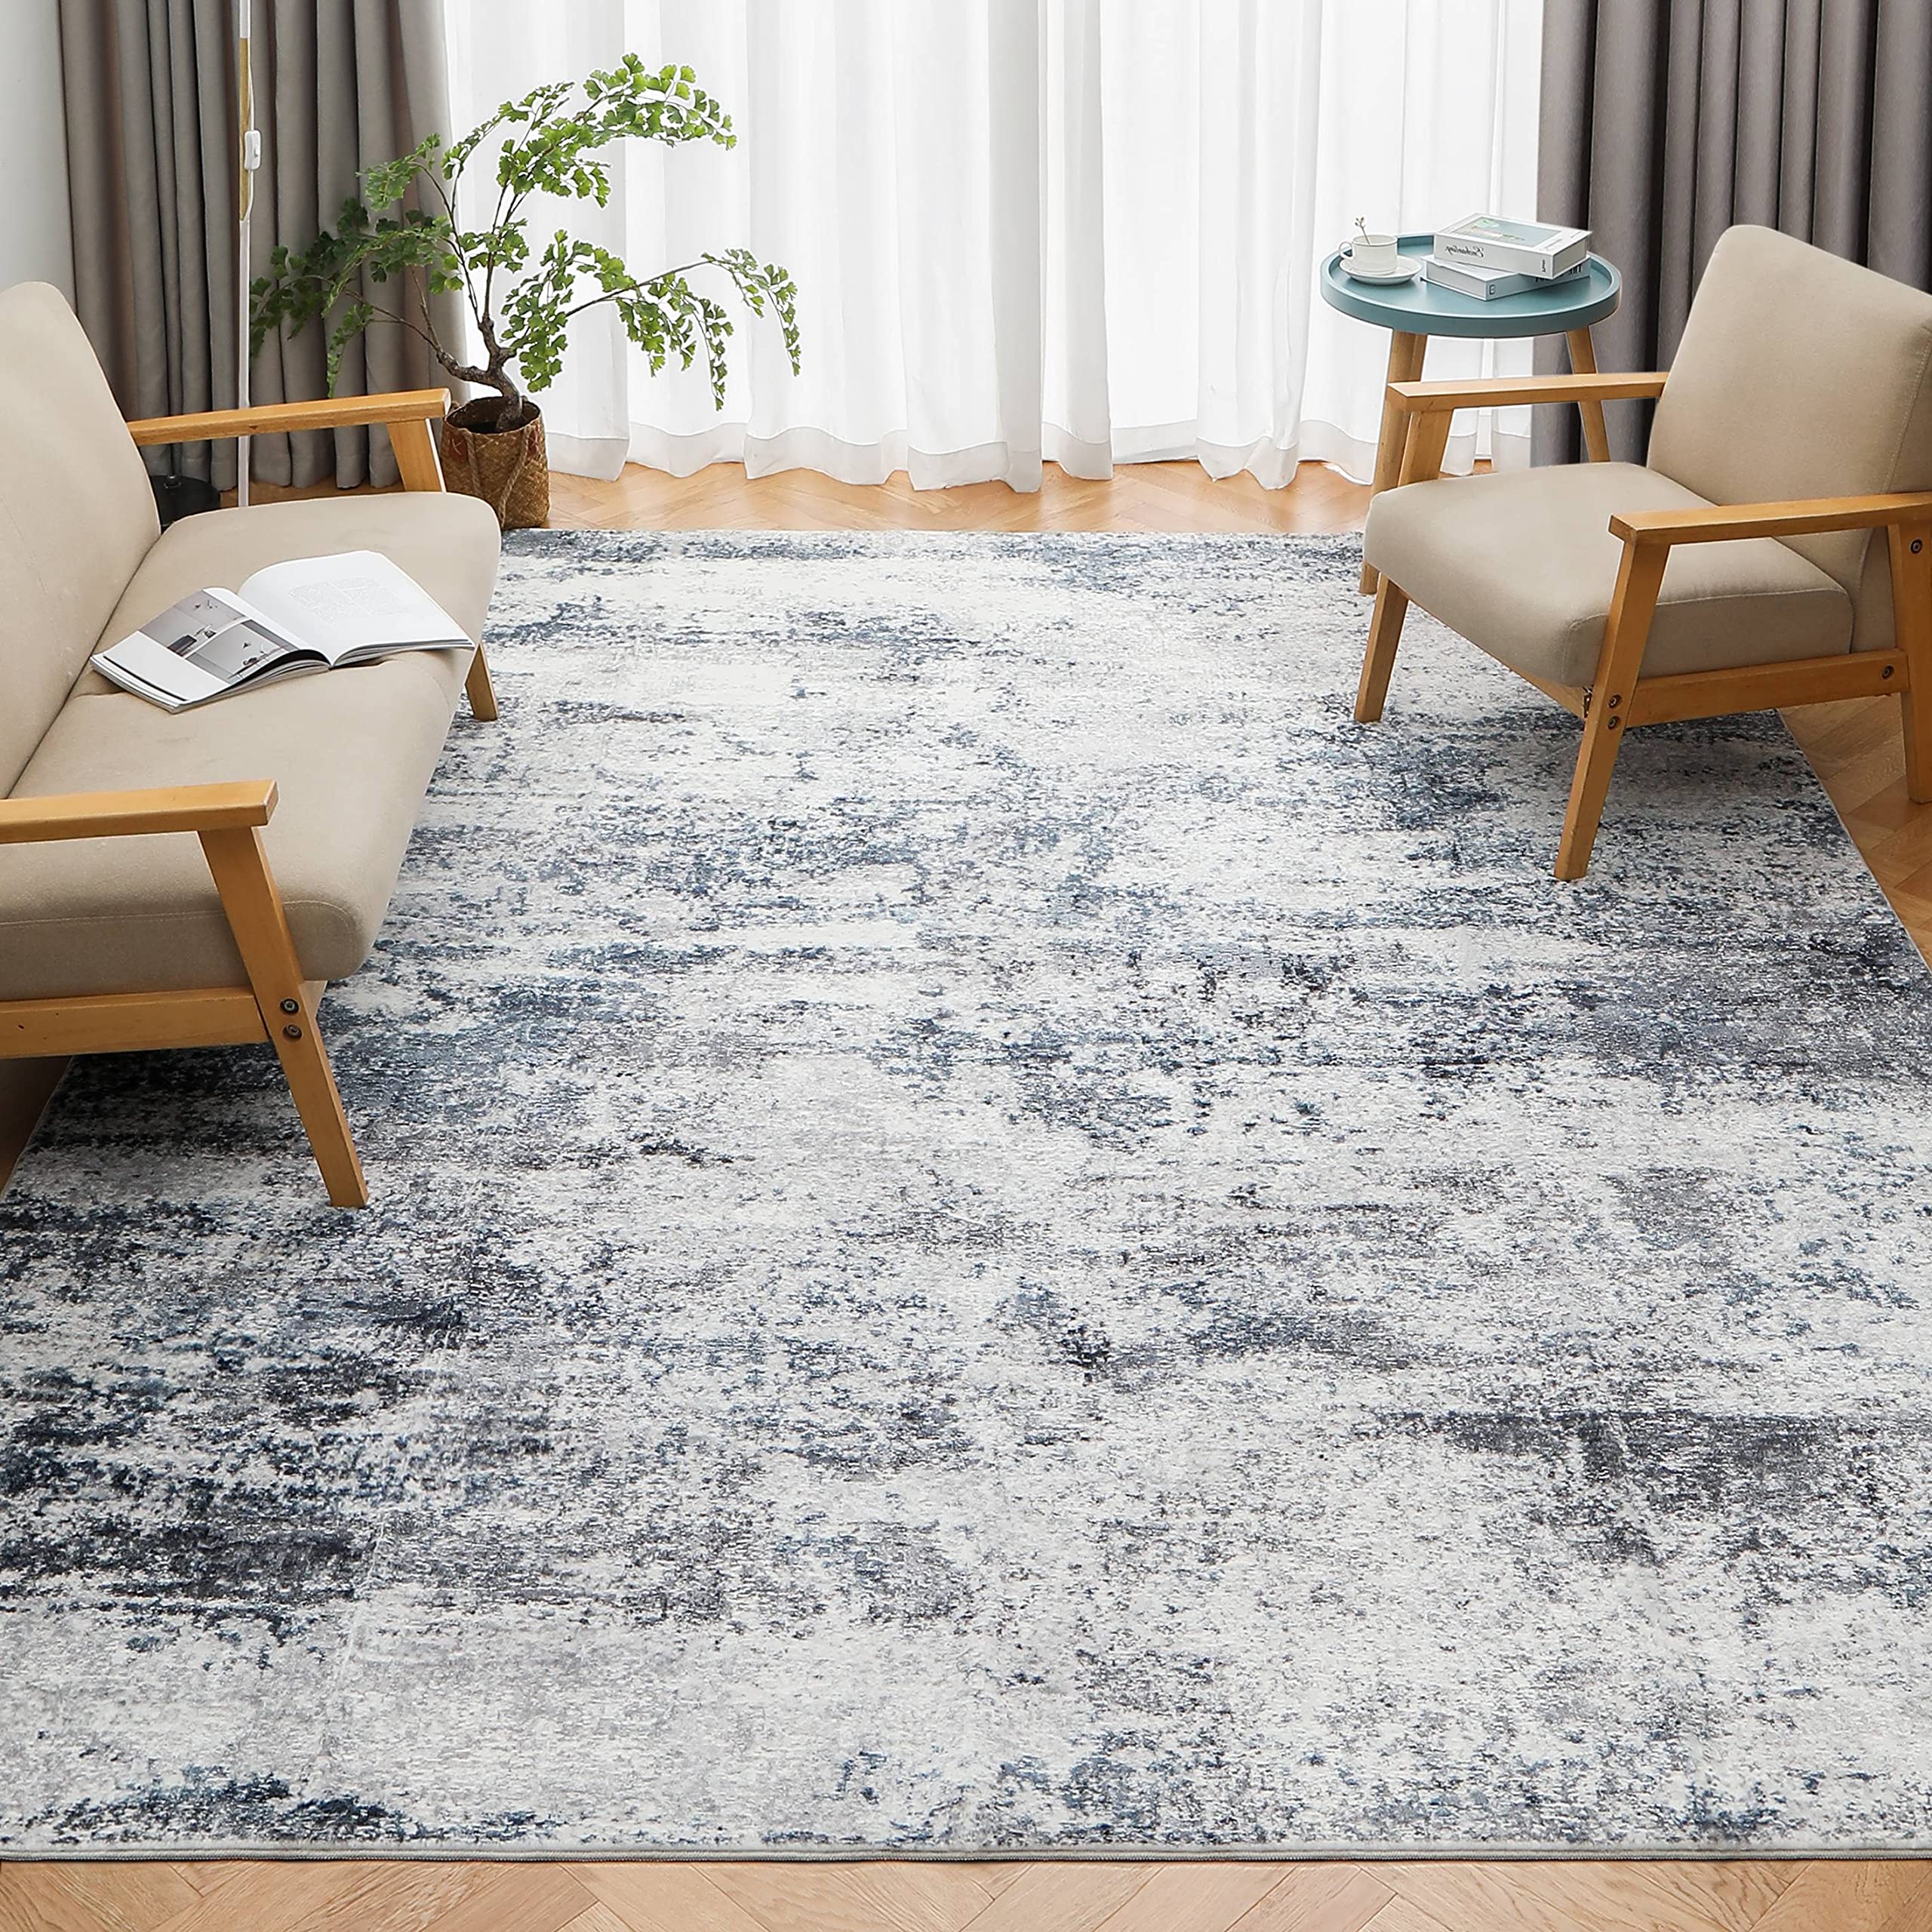 Area Rug Living Room Rugs: 3x5 Indoor Abstract Soft Fluffy Pile Large Carpet with Low Shaggy for Bedroom Dining Room Home Office Decor Under Kitchen Table Washable - Gray/Blue